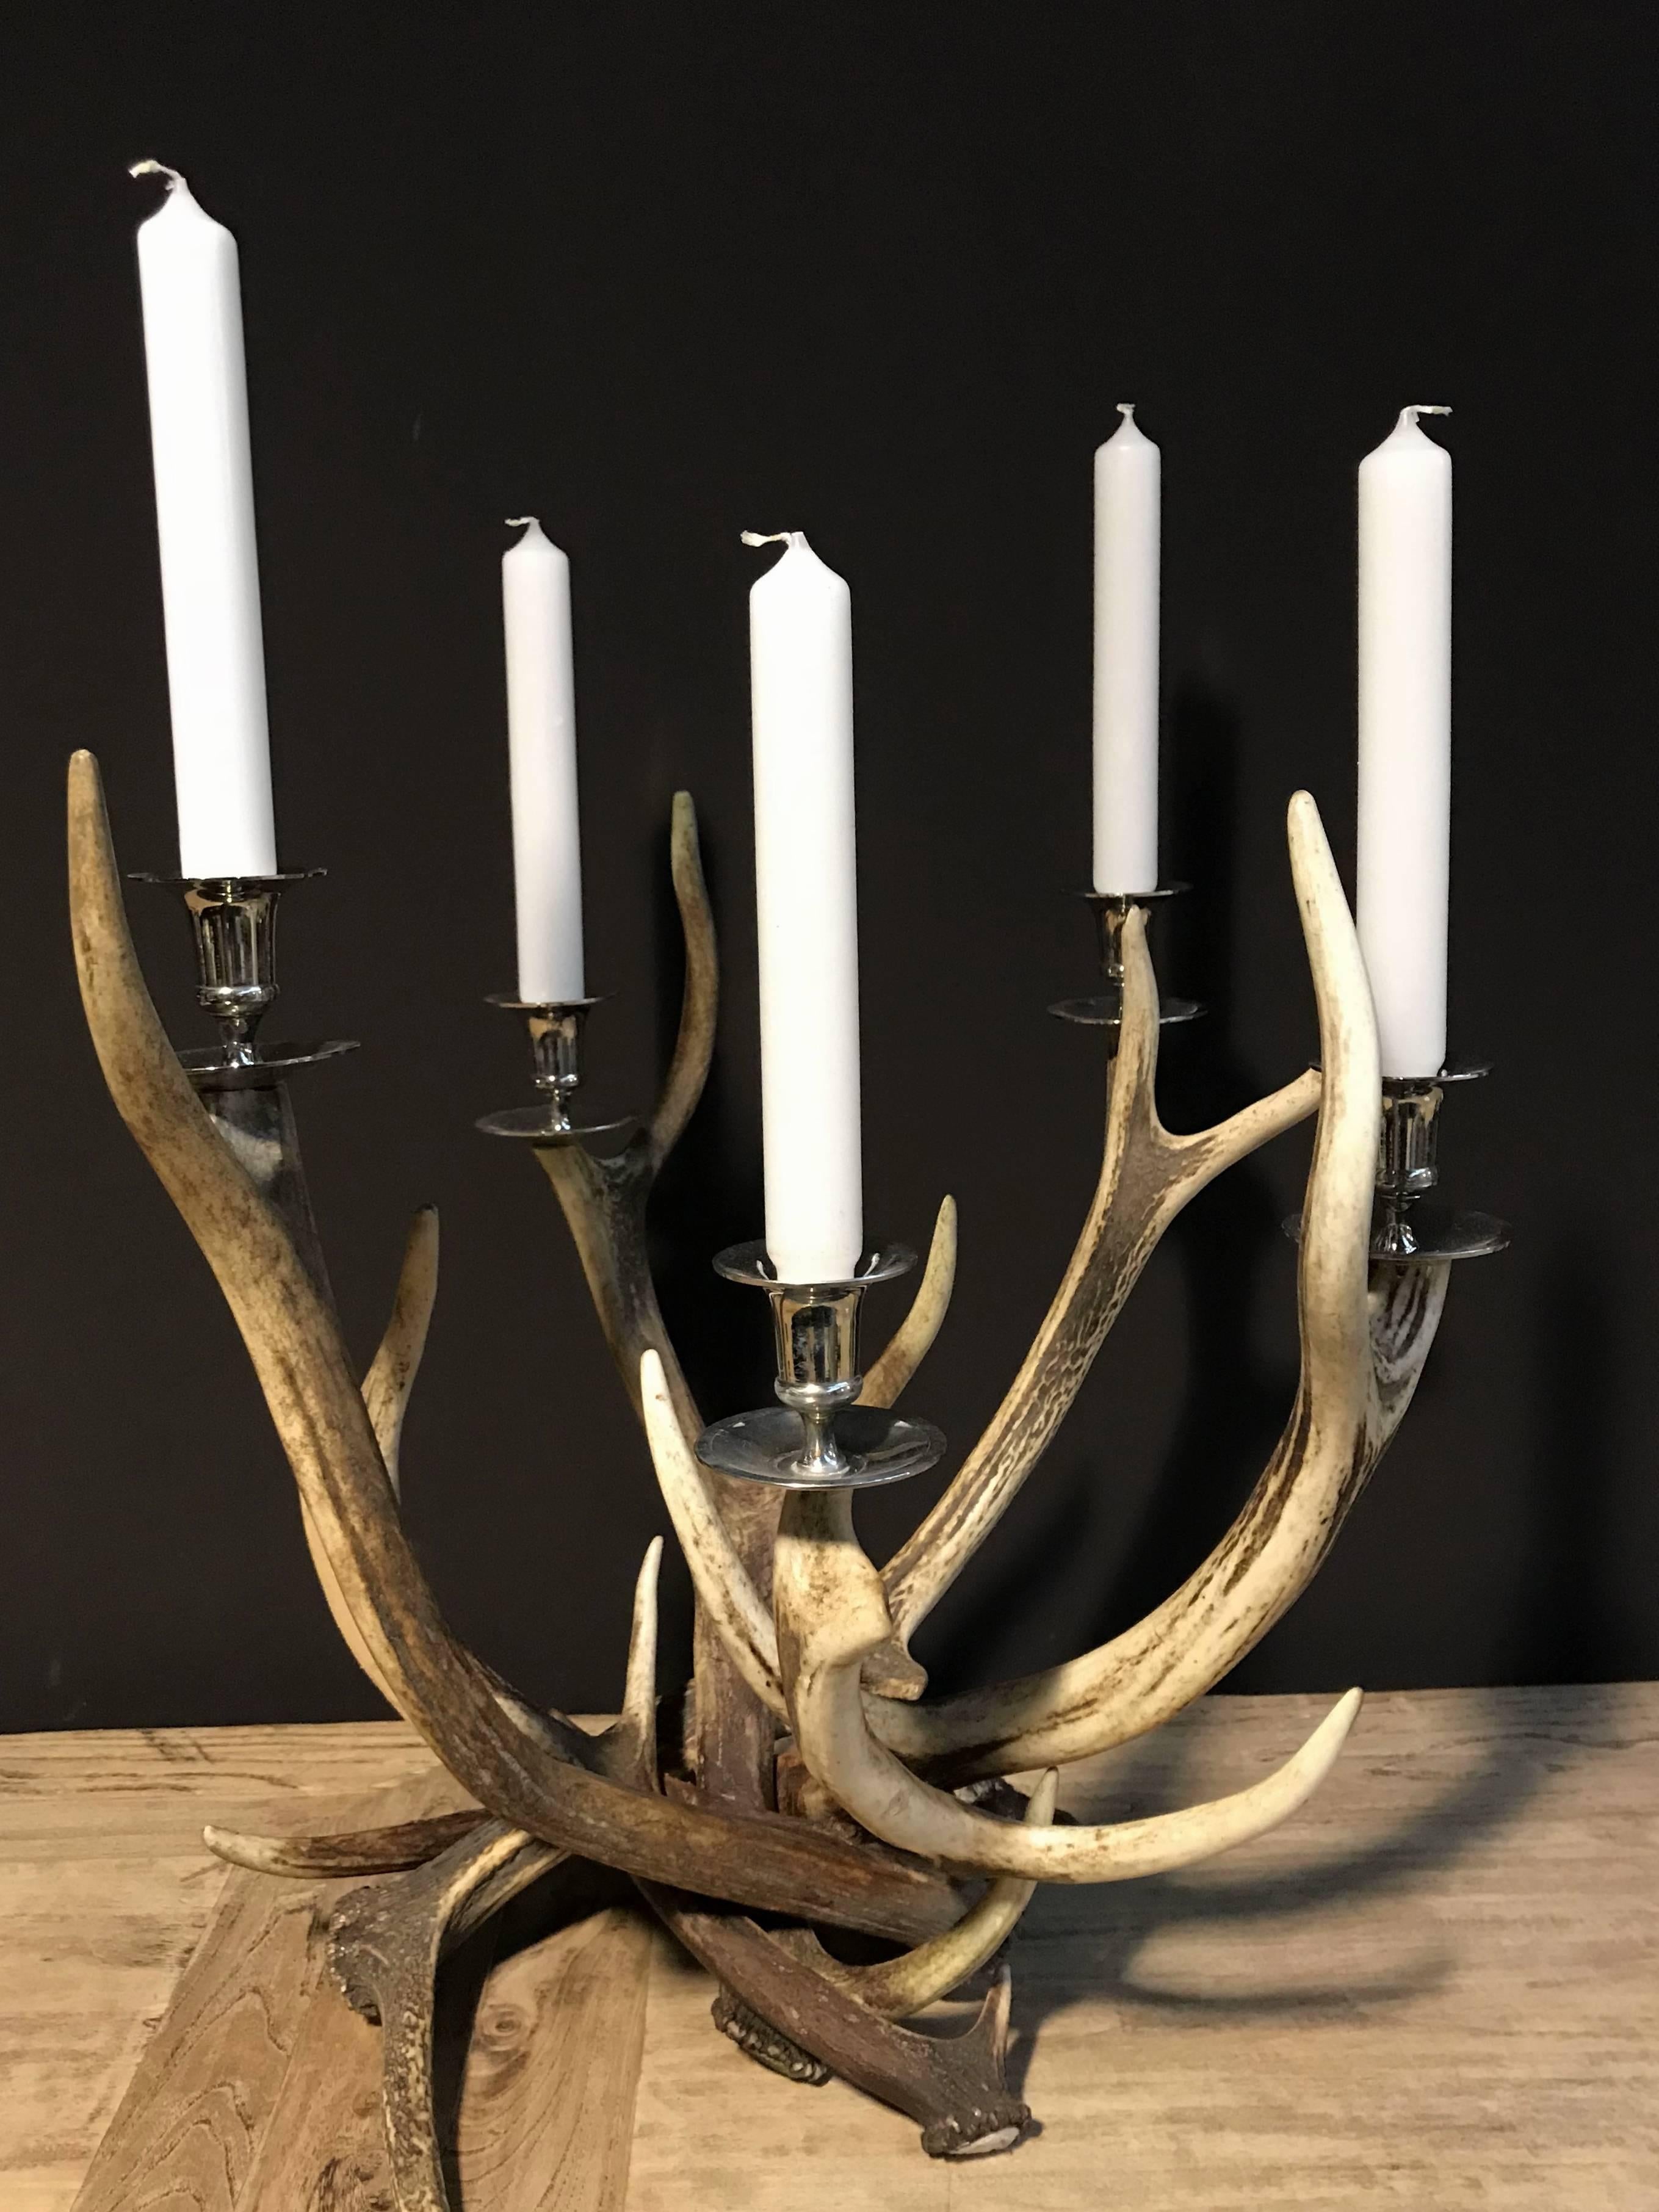 Candleholder made of red deer antlers and shiny chromed brass.